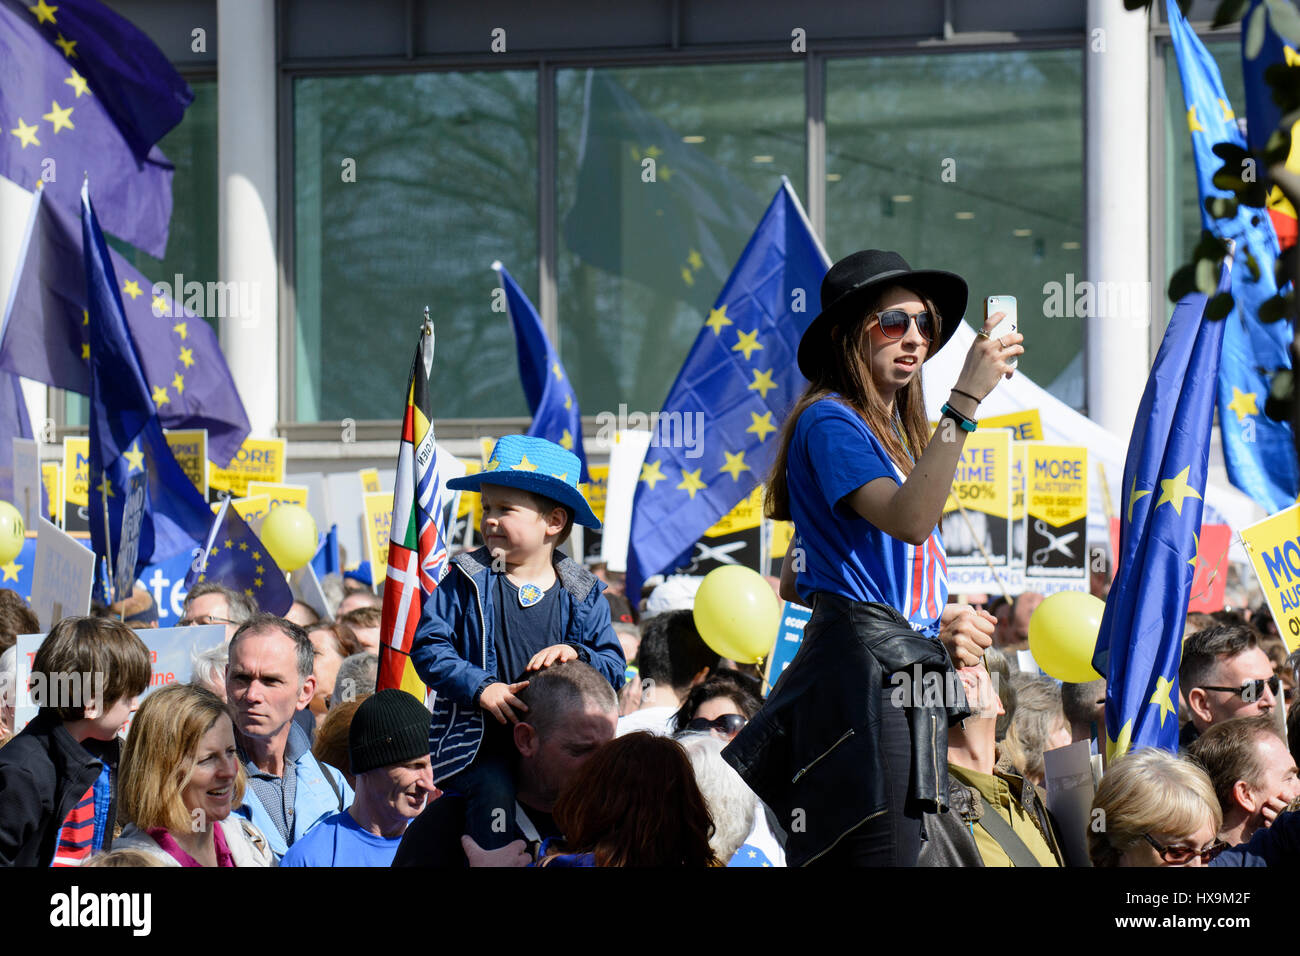 London, UK. 25th Mar 2017. Thousands of protesters attend March for Europe, marching through central London protesting against Brexit during the 60th EU anniversary, just before the Theresa May triggers article 50. Credit: ZEN - Zaneta Razaite/Alamy Live News Stock Photo